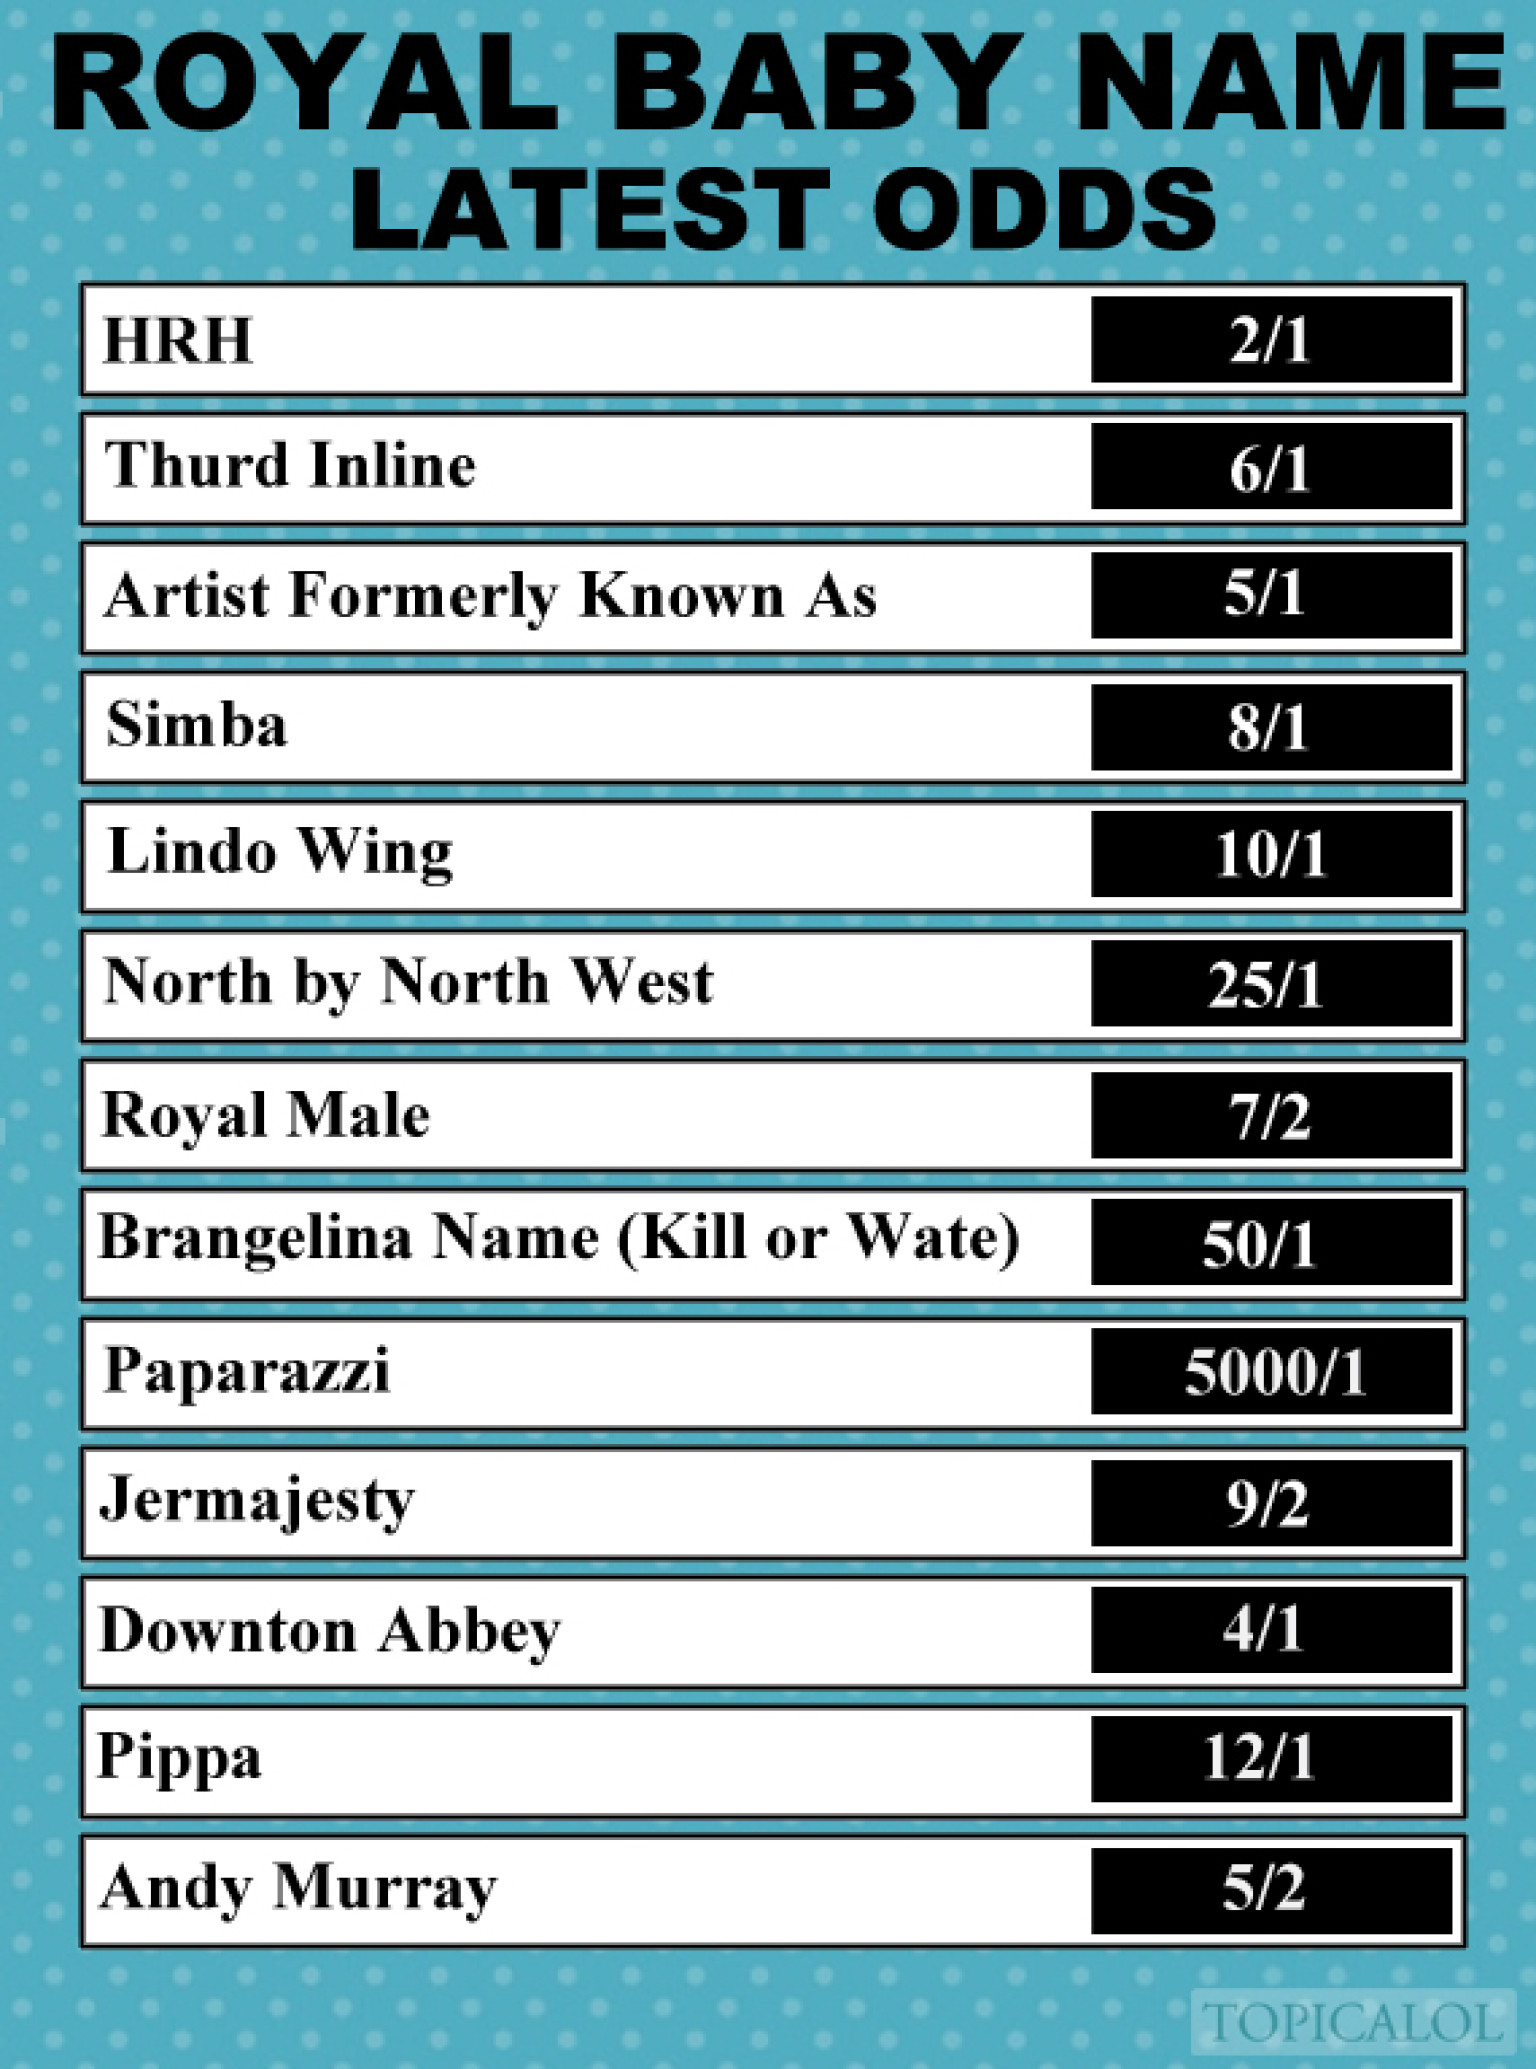 Latest Odds On Royal Baby Name (PICTURE) | HuffPost UK